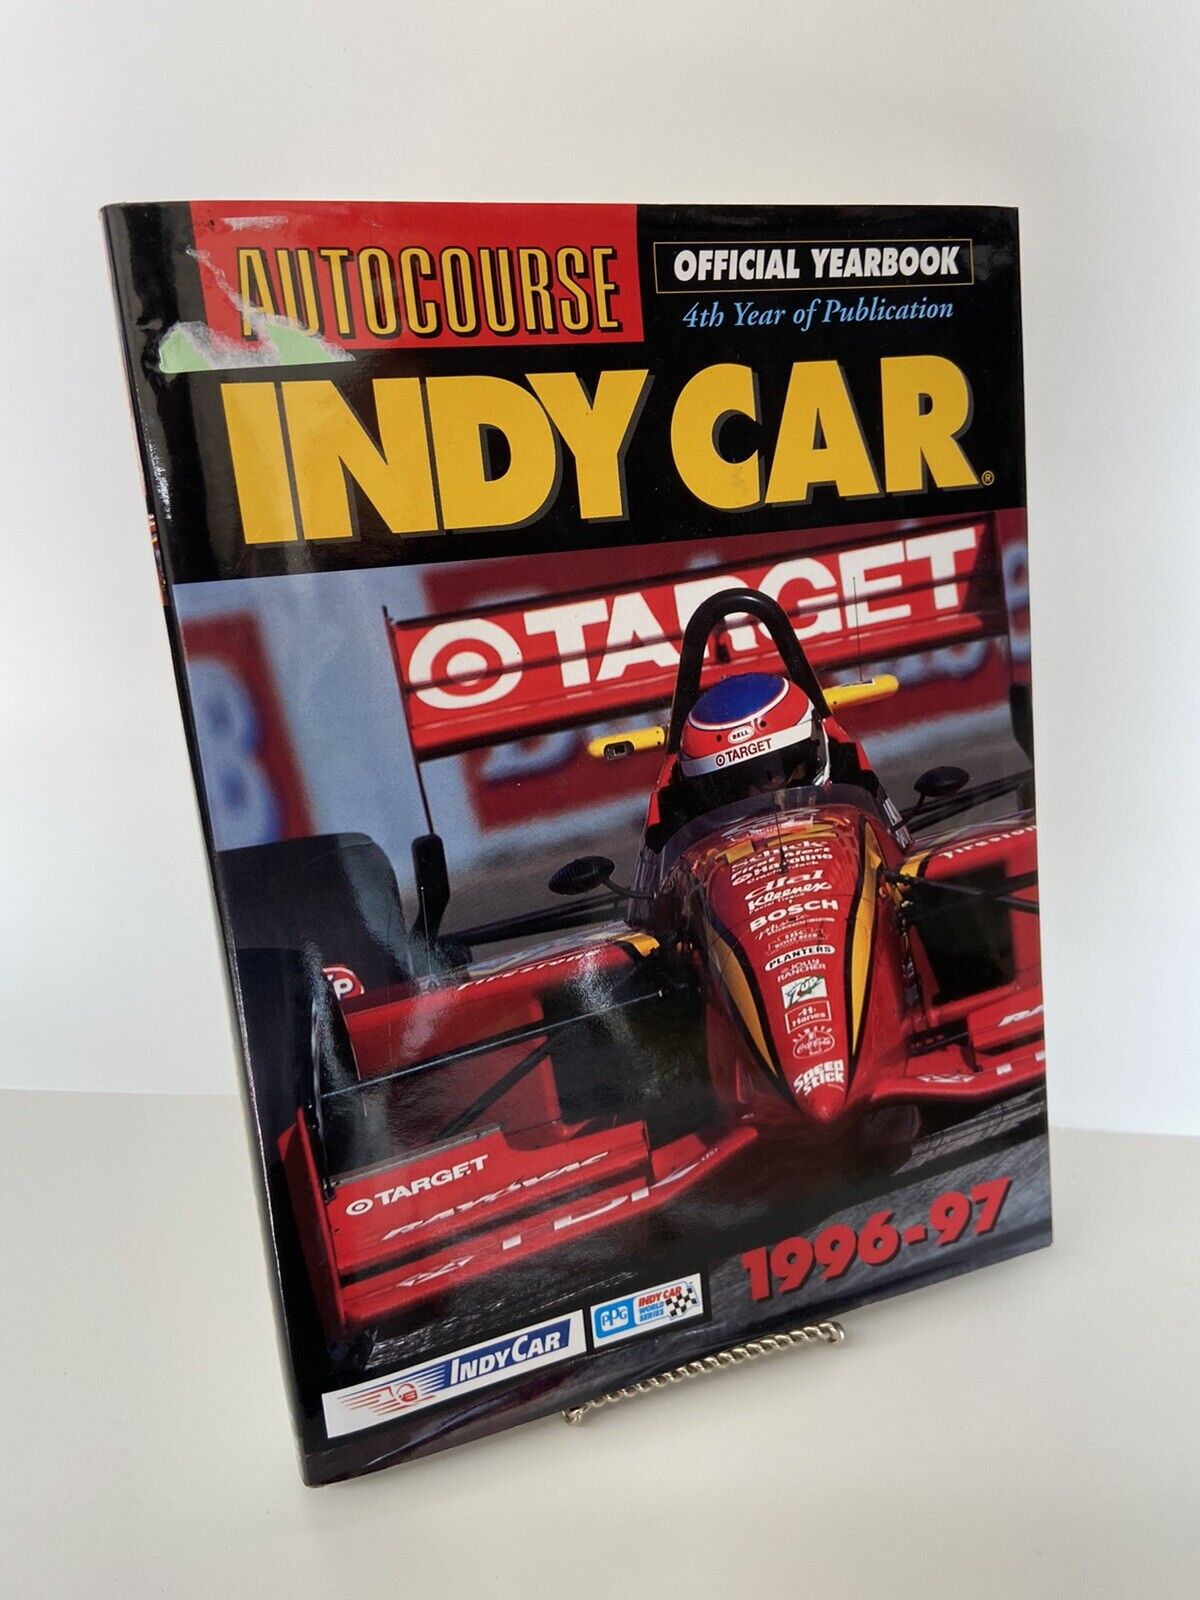 Indy Car 1996-1997 Official Yearbook By Autocourse - Ppg Indy Car World Series